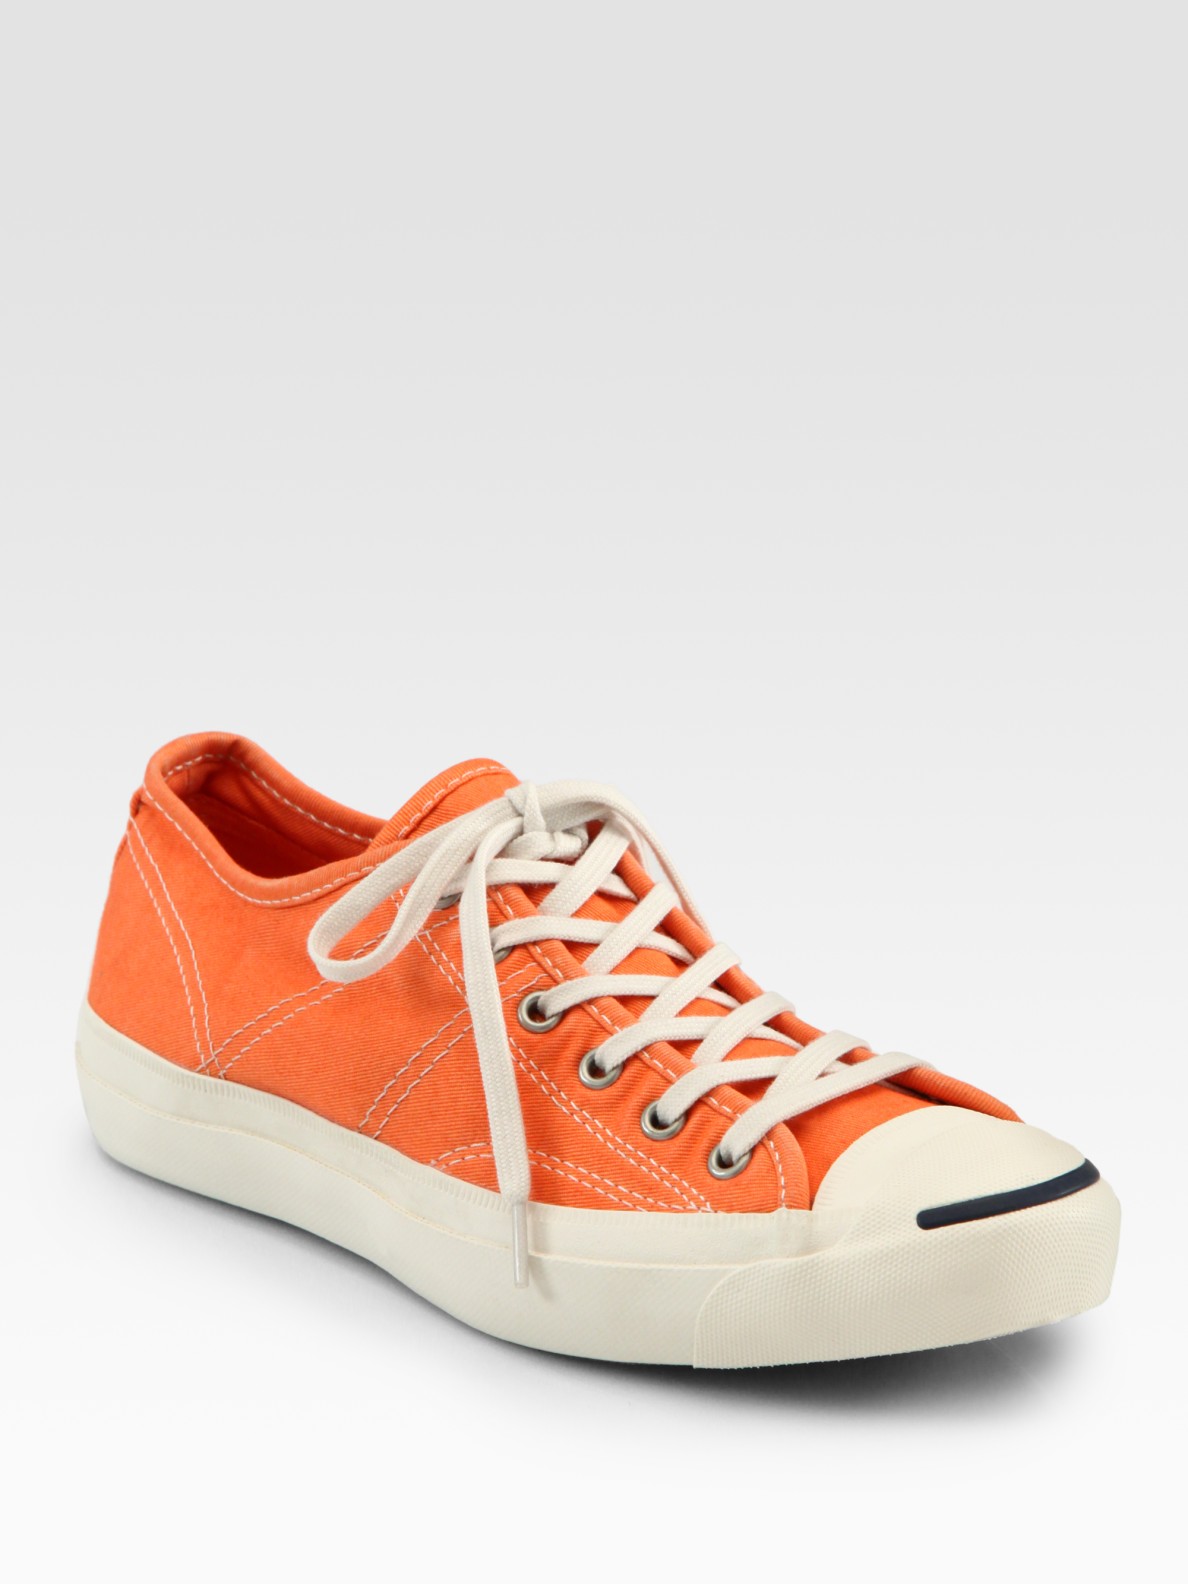 Converse Lux Jack Purcell Lace-up Sneakers in Orange - Lyst